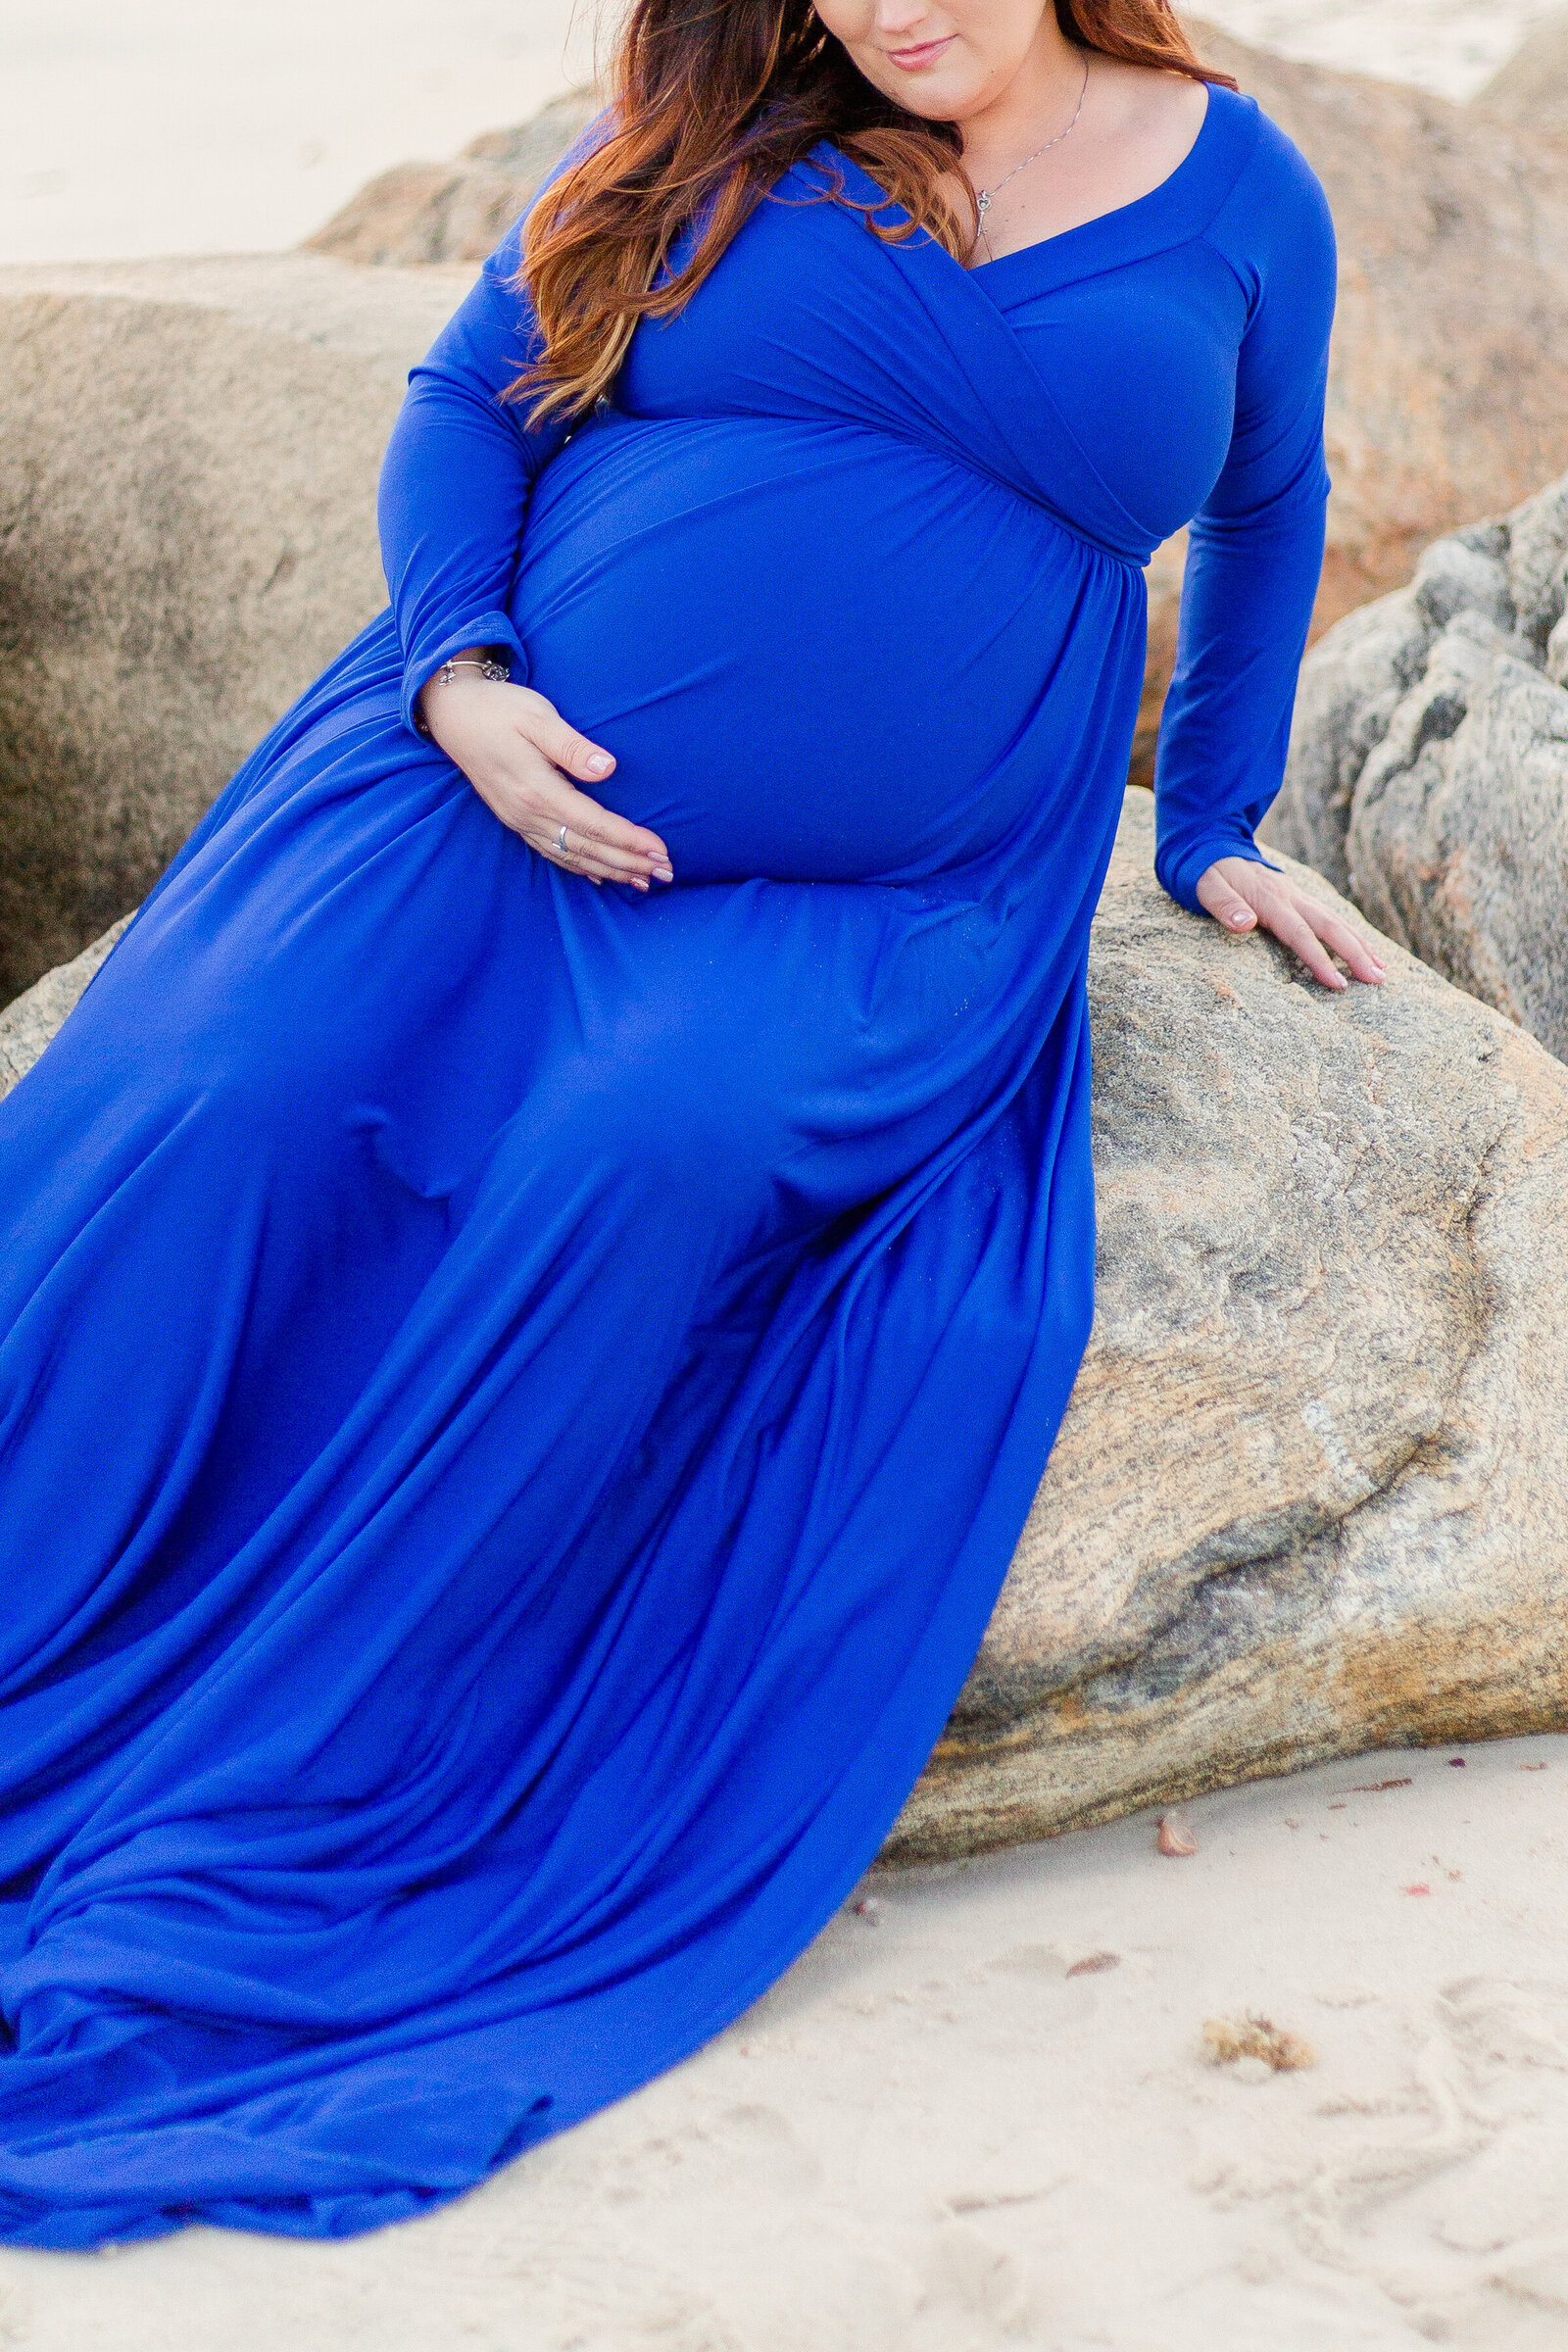 20190423_Spring Summer Coastal Beach Maternity Family Session_Eolia Mansion_Harkness Memorial State Park_Waterford_CT-187